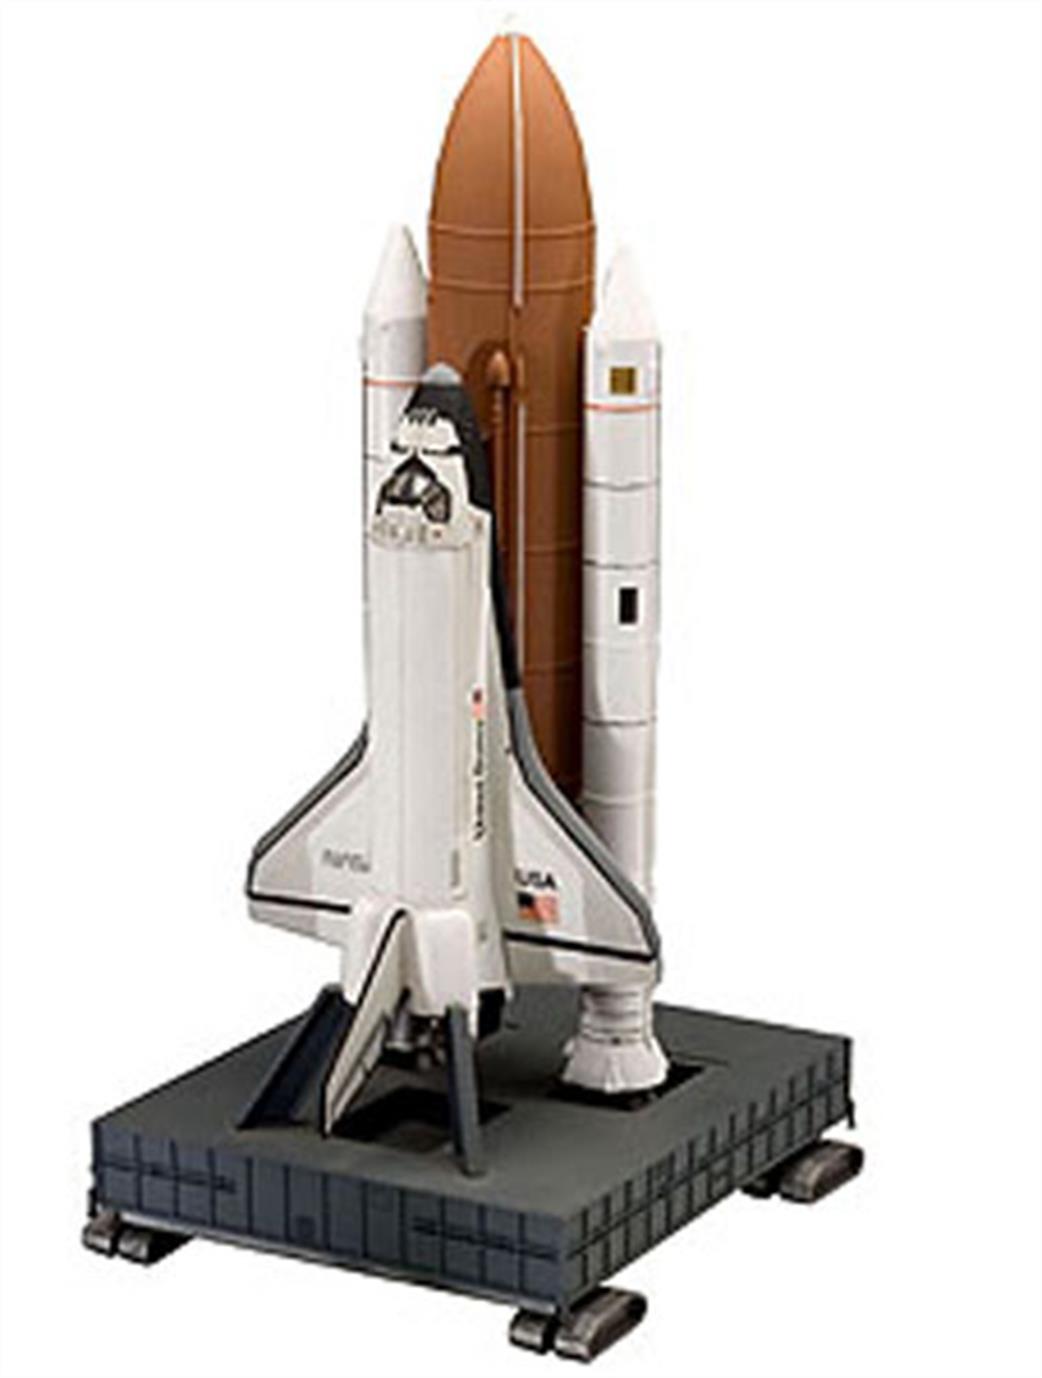 Revell 1/144 04736 Space Shuttle Discovery with Rocket Boosters Kit